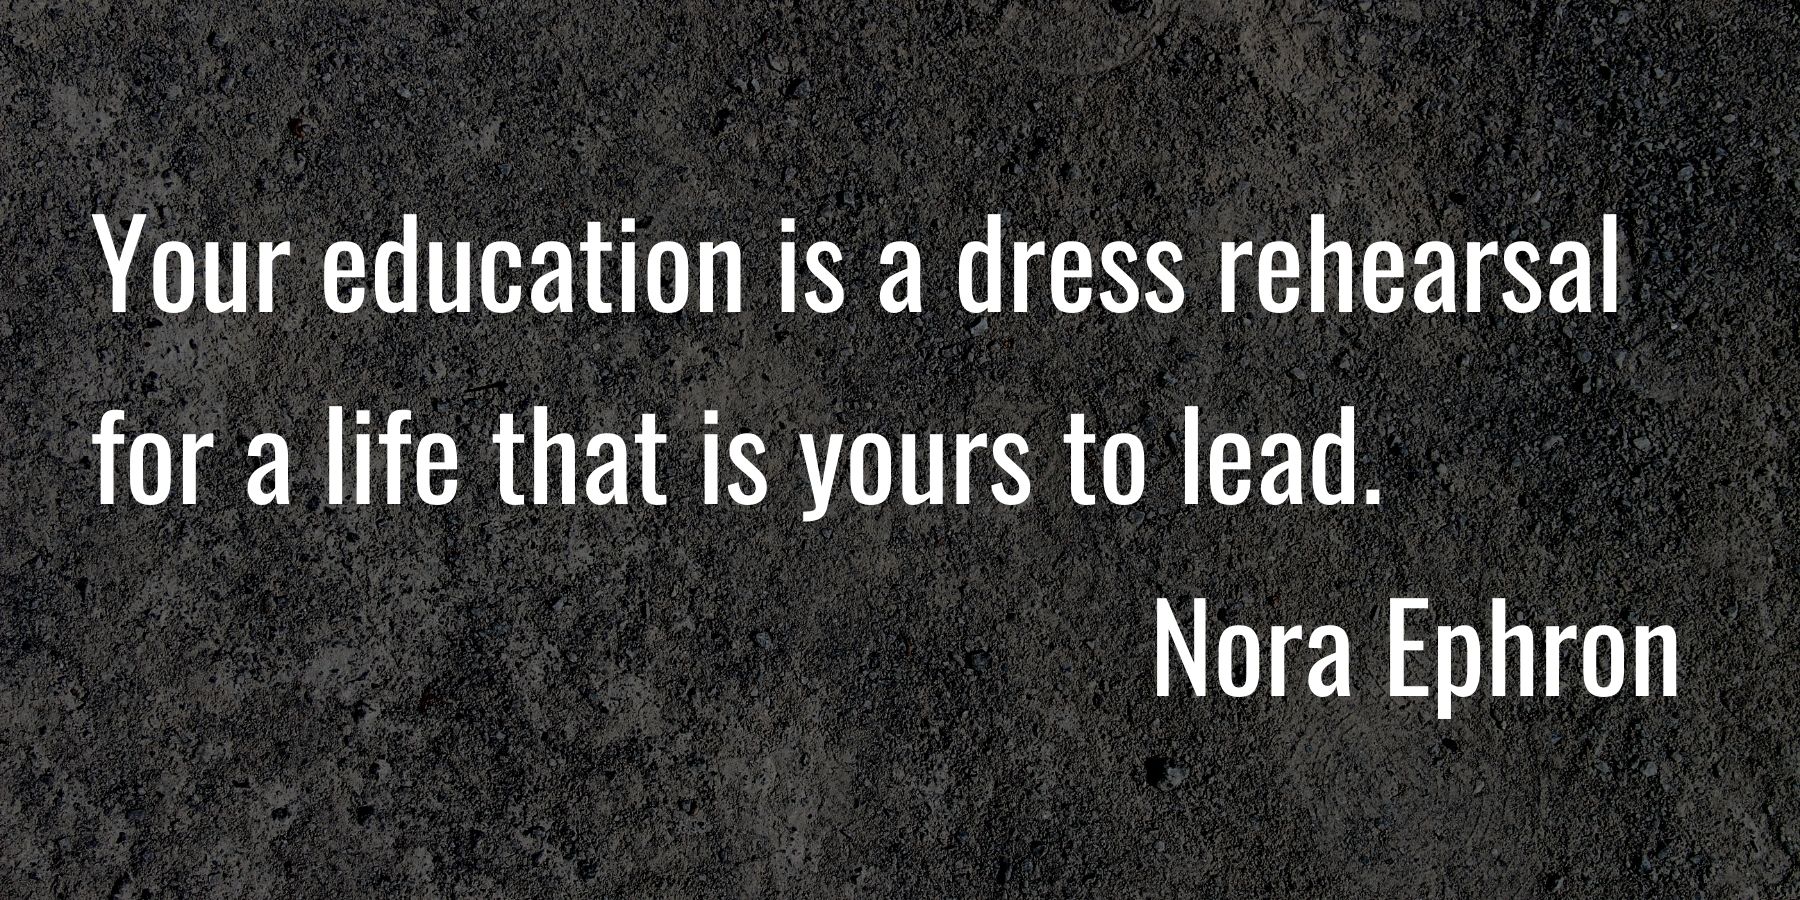 Text: Your education is a dress rehearsal for a life that is yours to lead. Nora Ephron